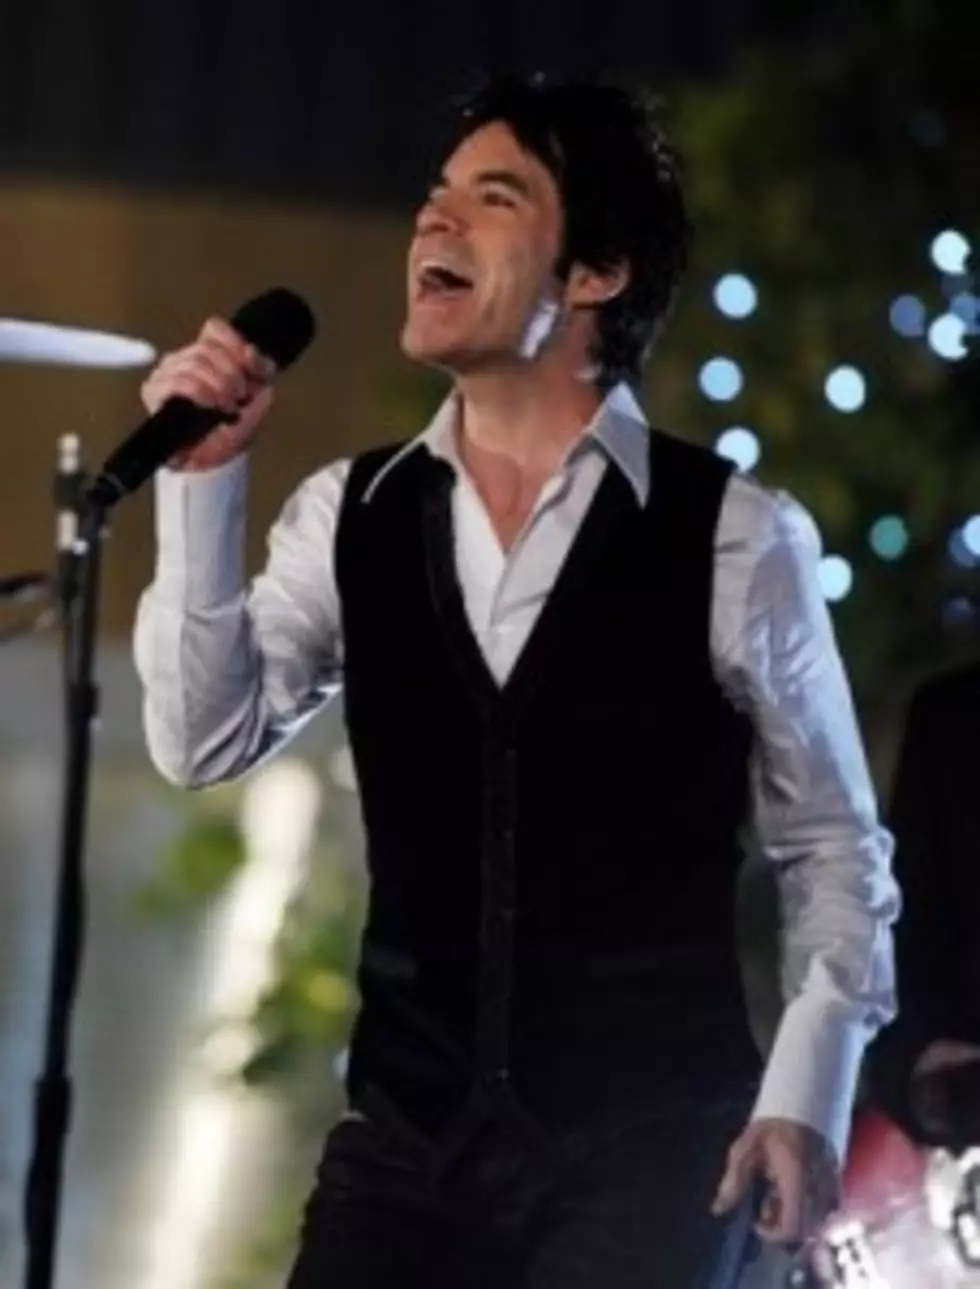 Train Serenades The Ladies Of The Bachelor, Tonight!